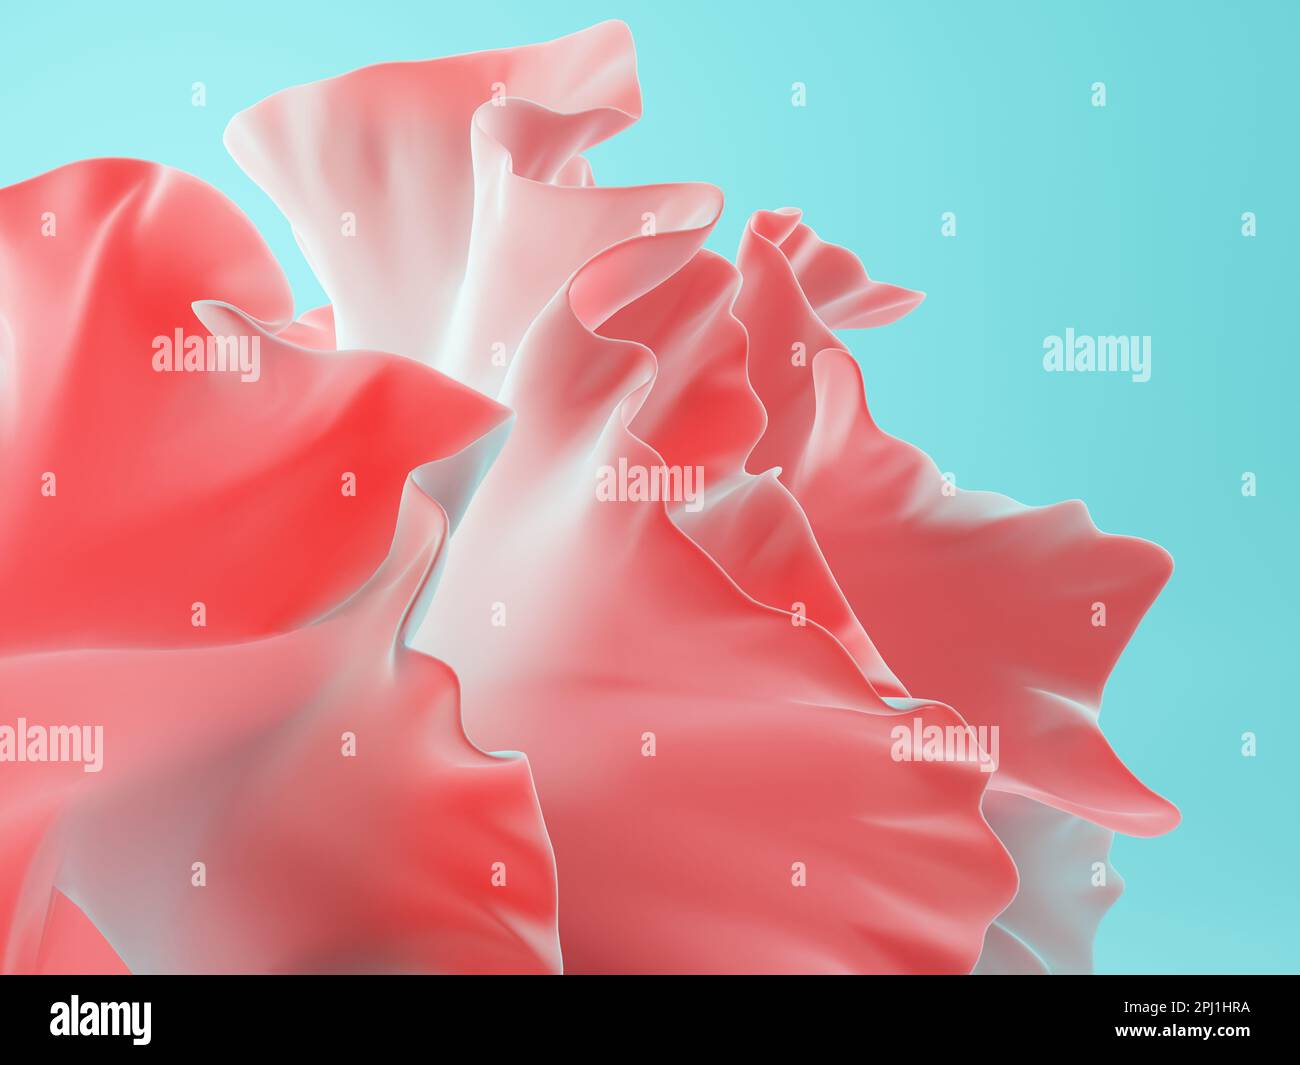 Organic abstract shape with pink coral gradients against the teal background. Artificial nature conceptual 3D render Stock Photo